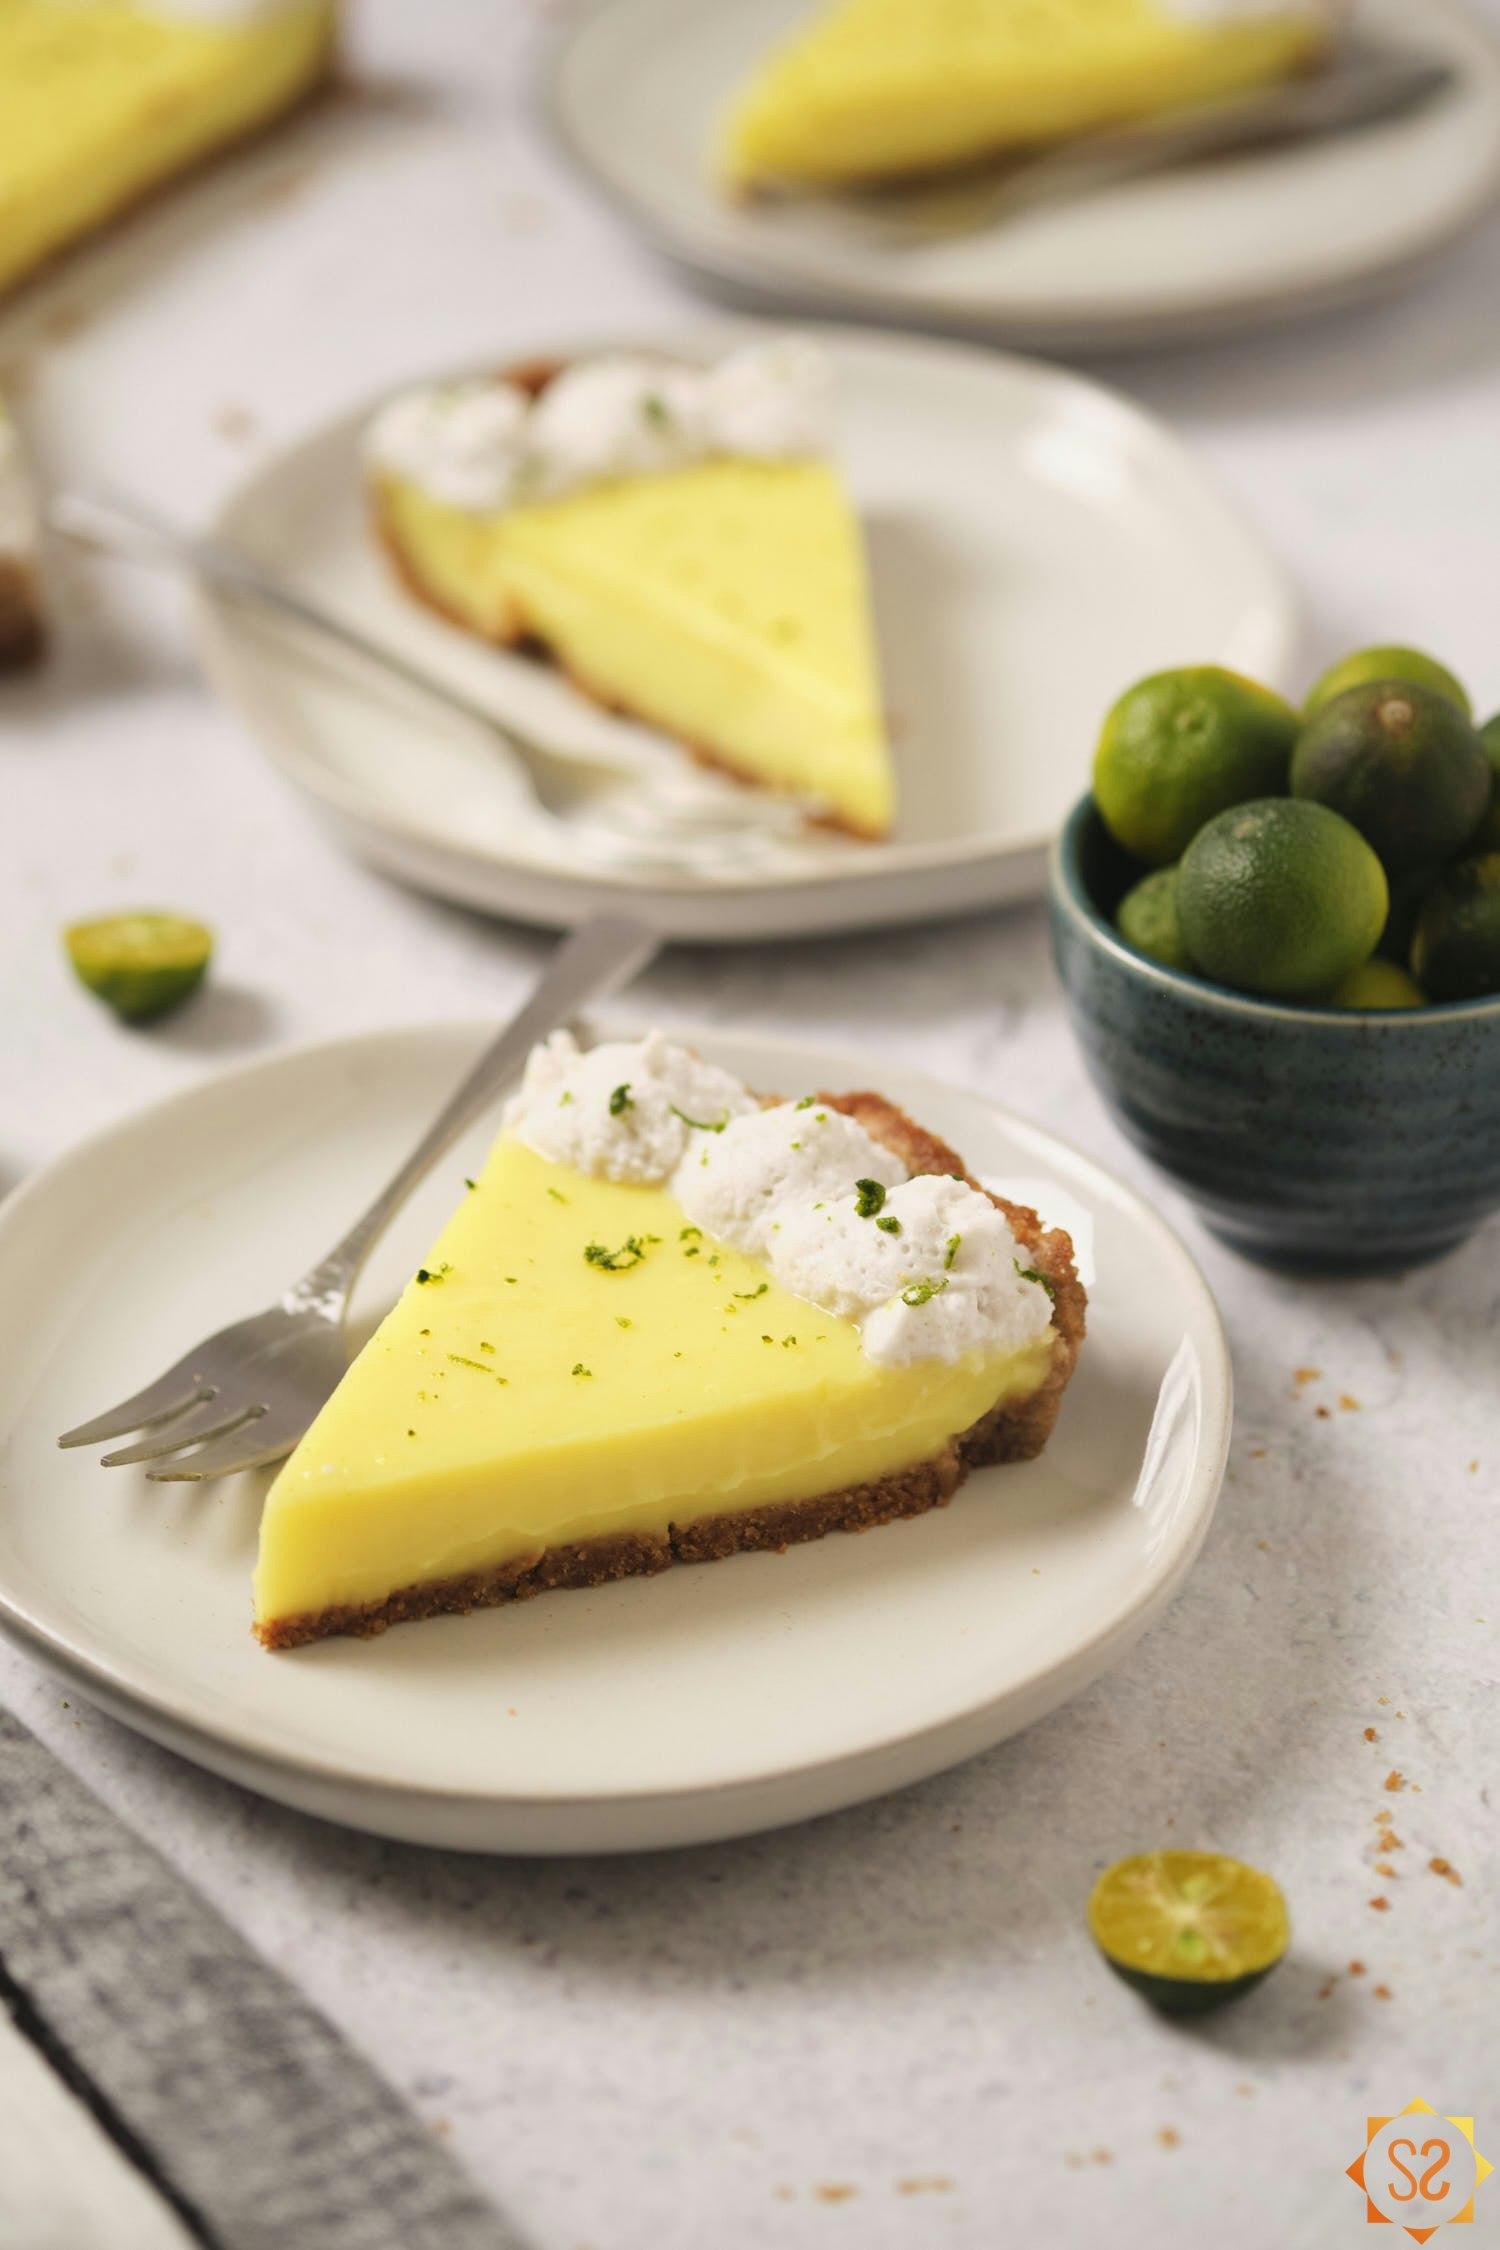 A slice of vegan Key lime pie on a plate, with more plates of pie in the background.